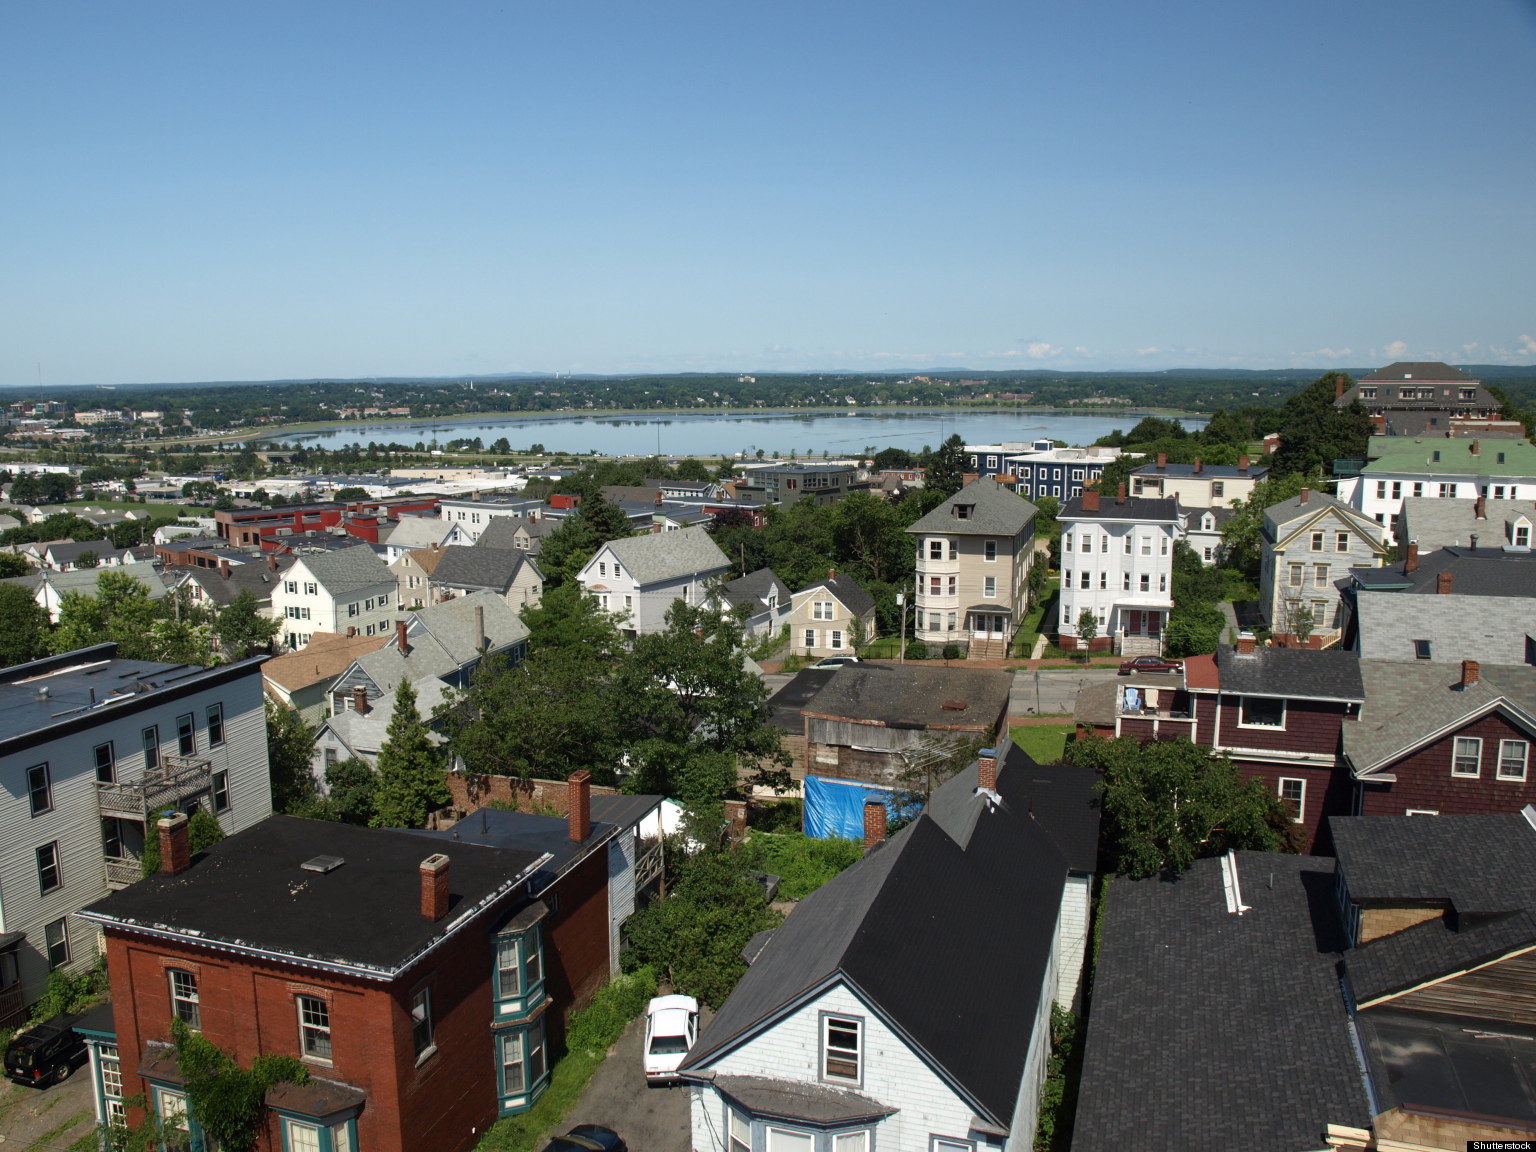 Maine Earthquake Facts: How Unusual Was The Tremor On October 16th? | HuffPost1536 x 1152